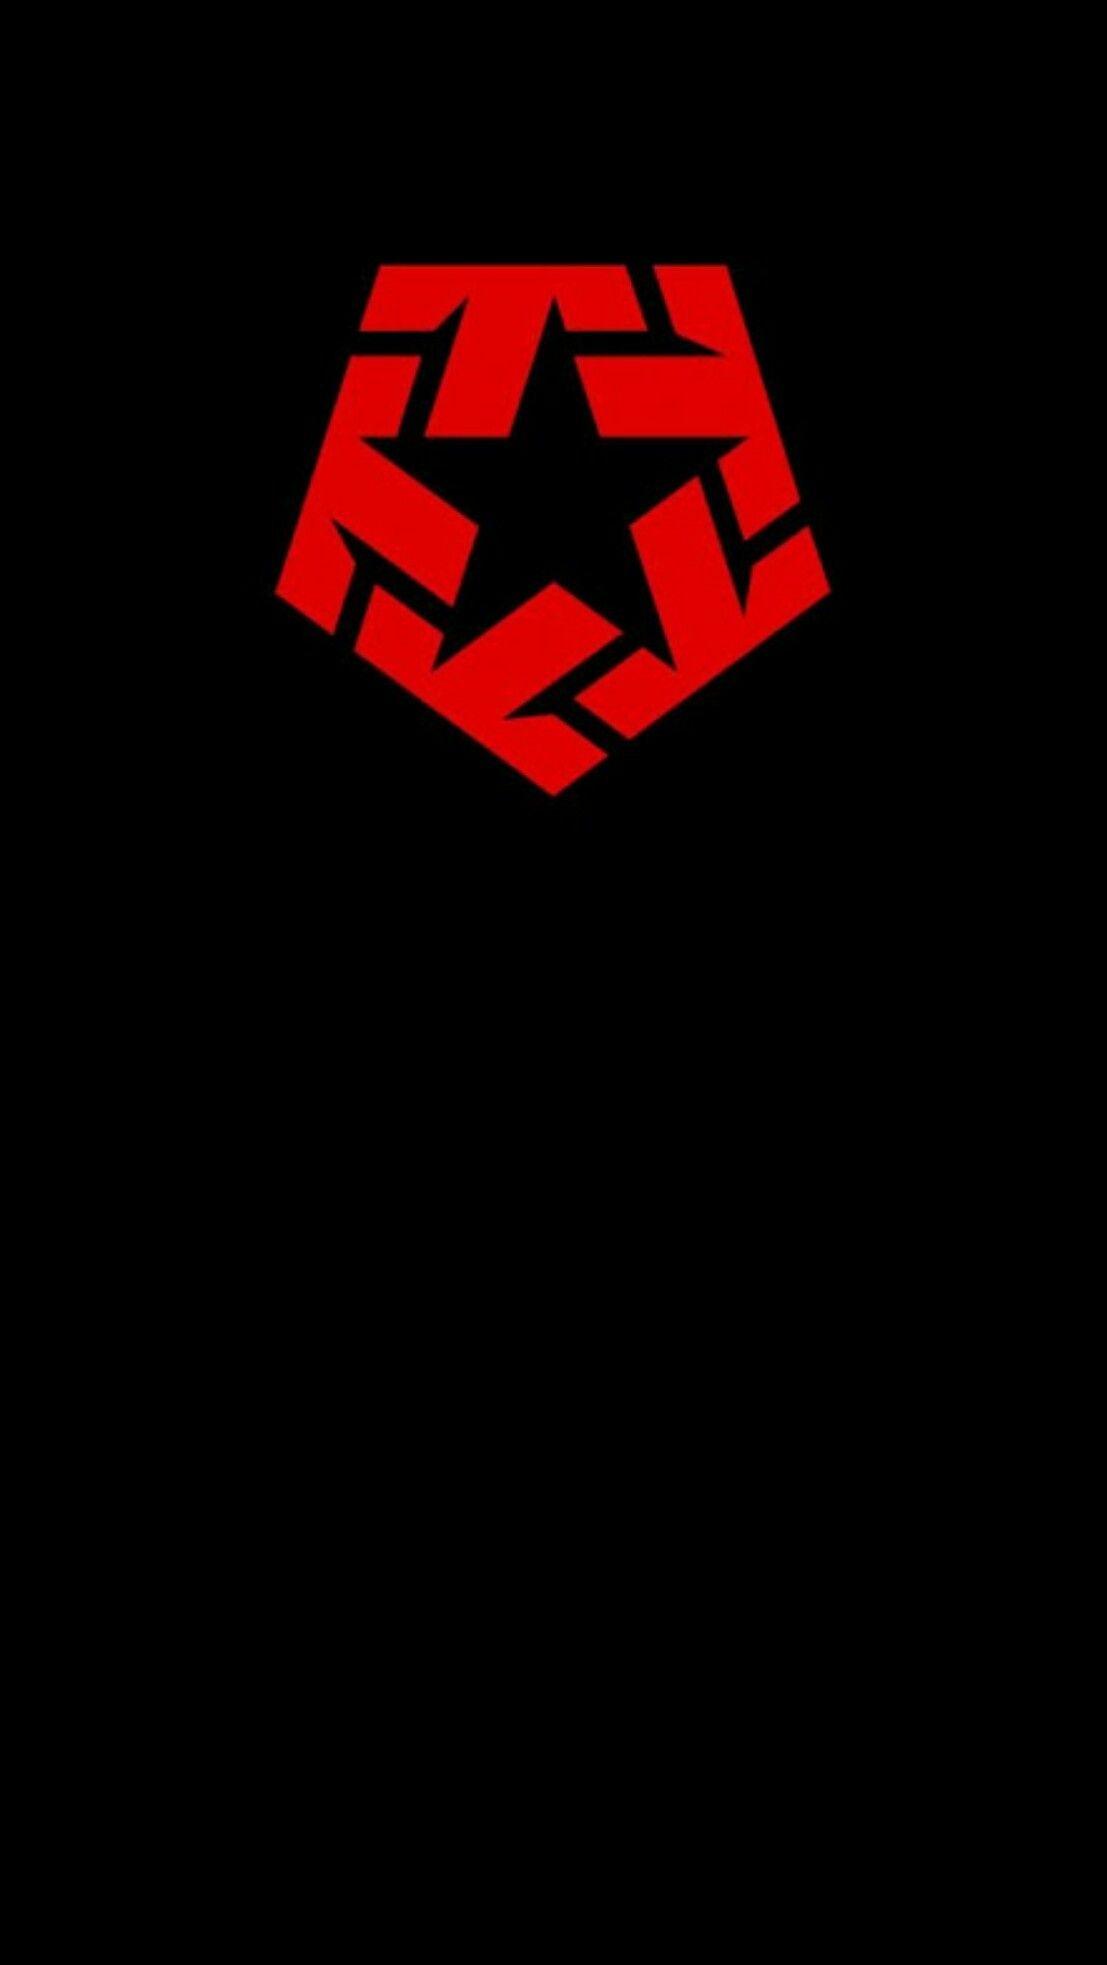 Black and Red iPhone Wallpaper